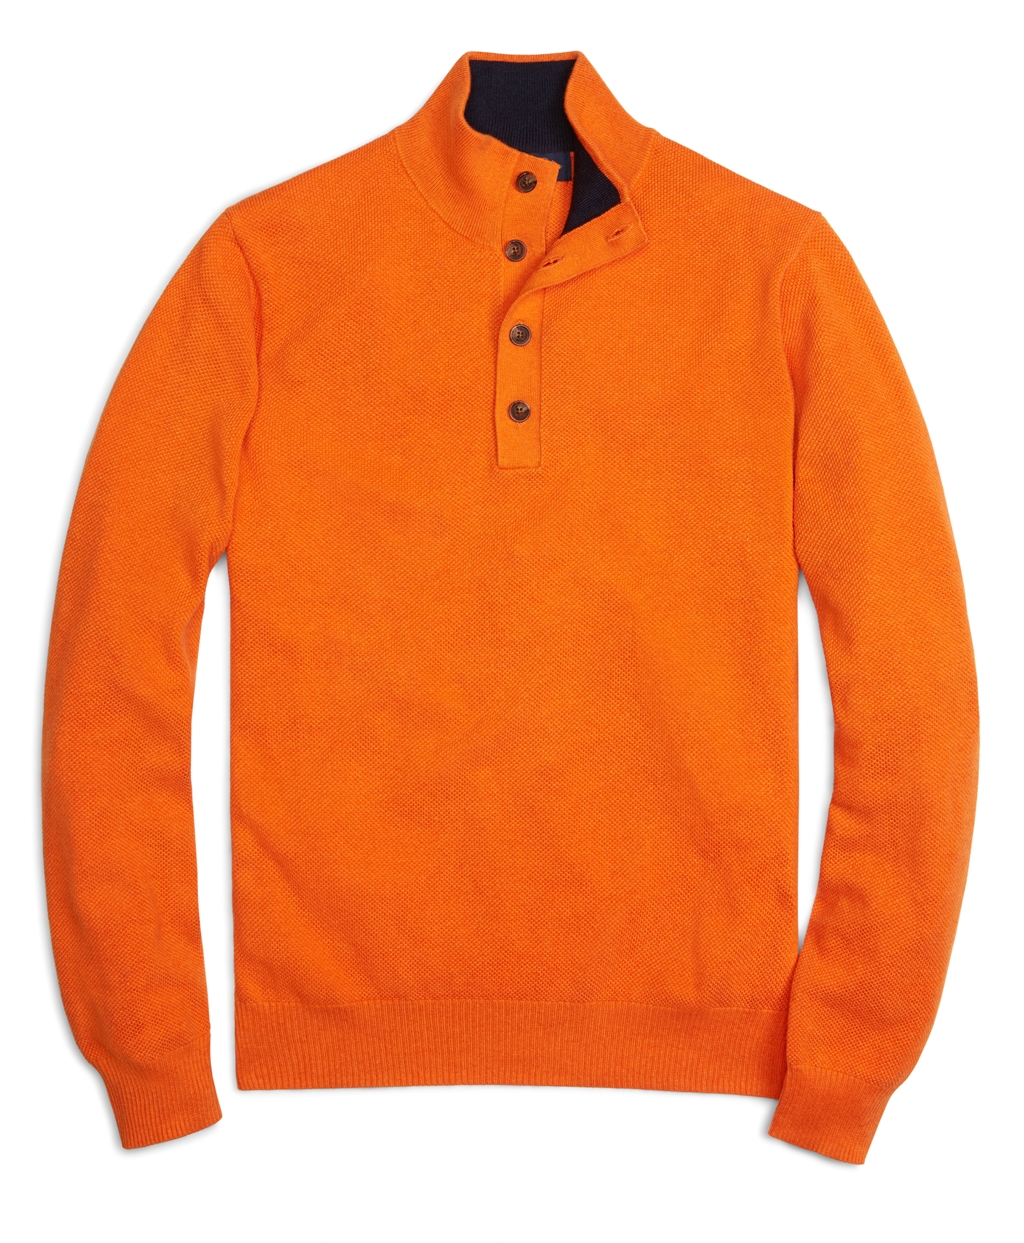 Lyst - Brooks Brothers Cotton Cashmere Button Mock Neck Sweater in ...